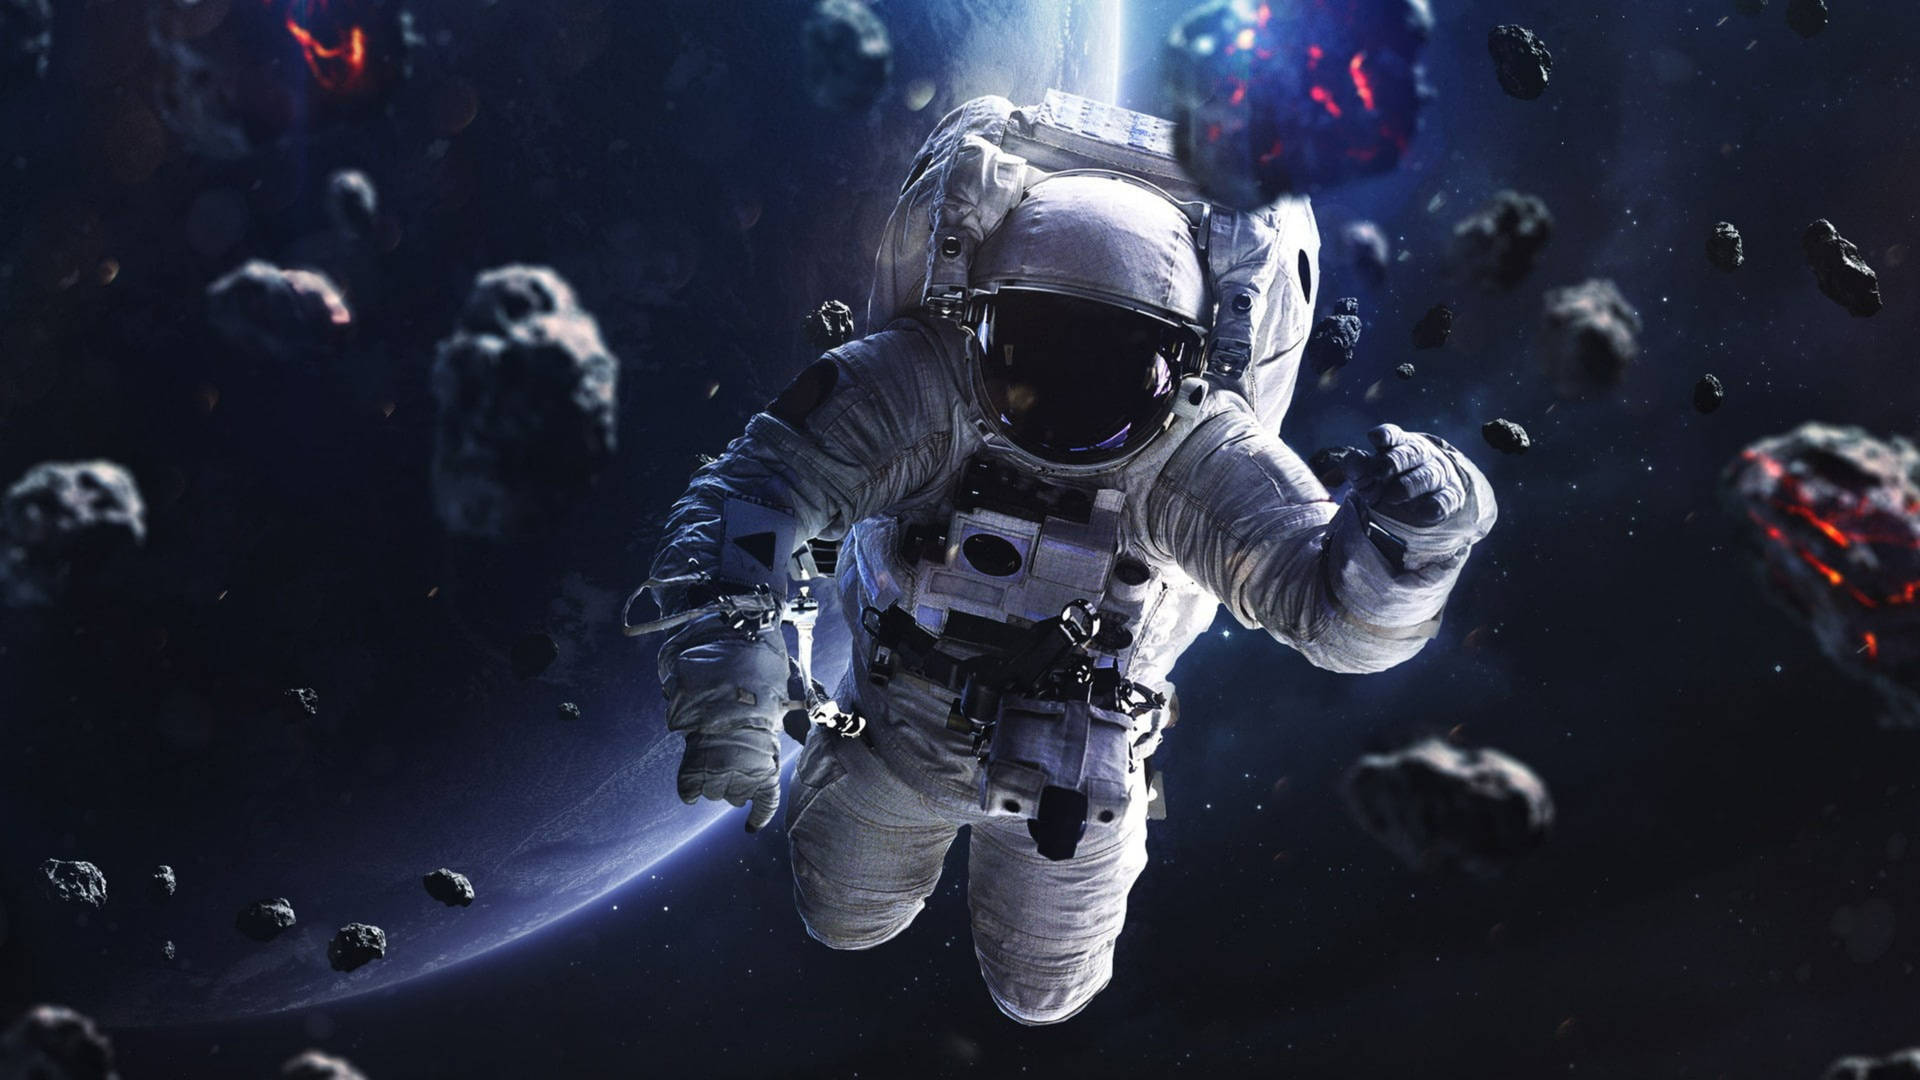 Free 4k Space Wallpaper Downloads, [200+] 4k Space Wallpapers for FREE |  